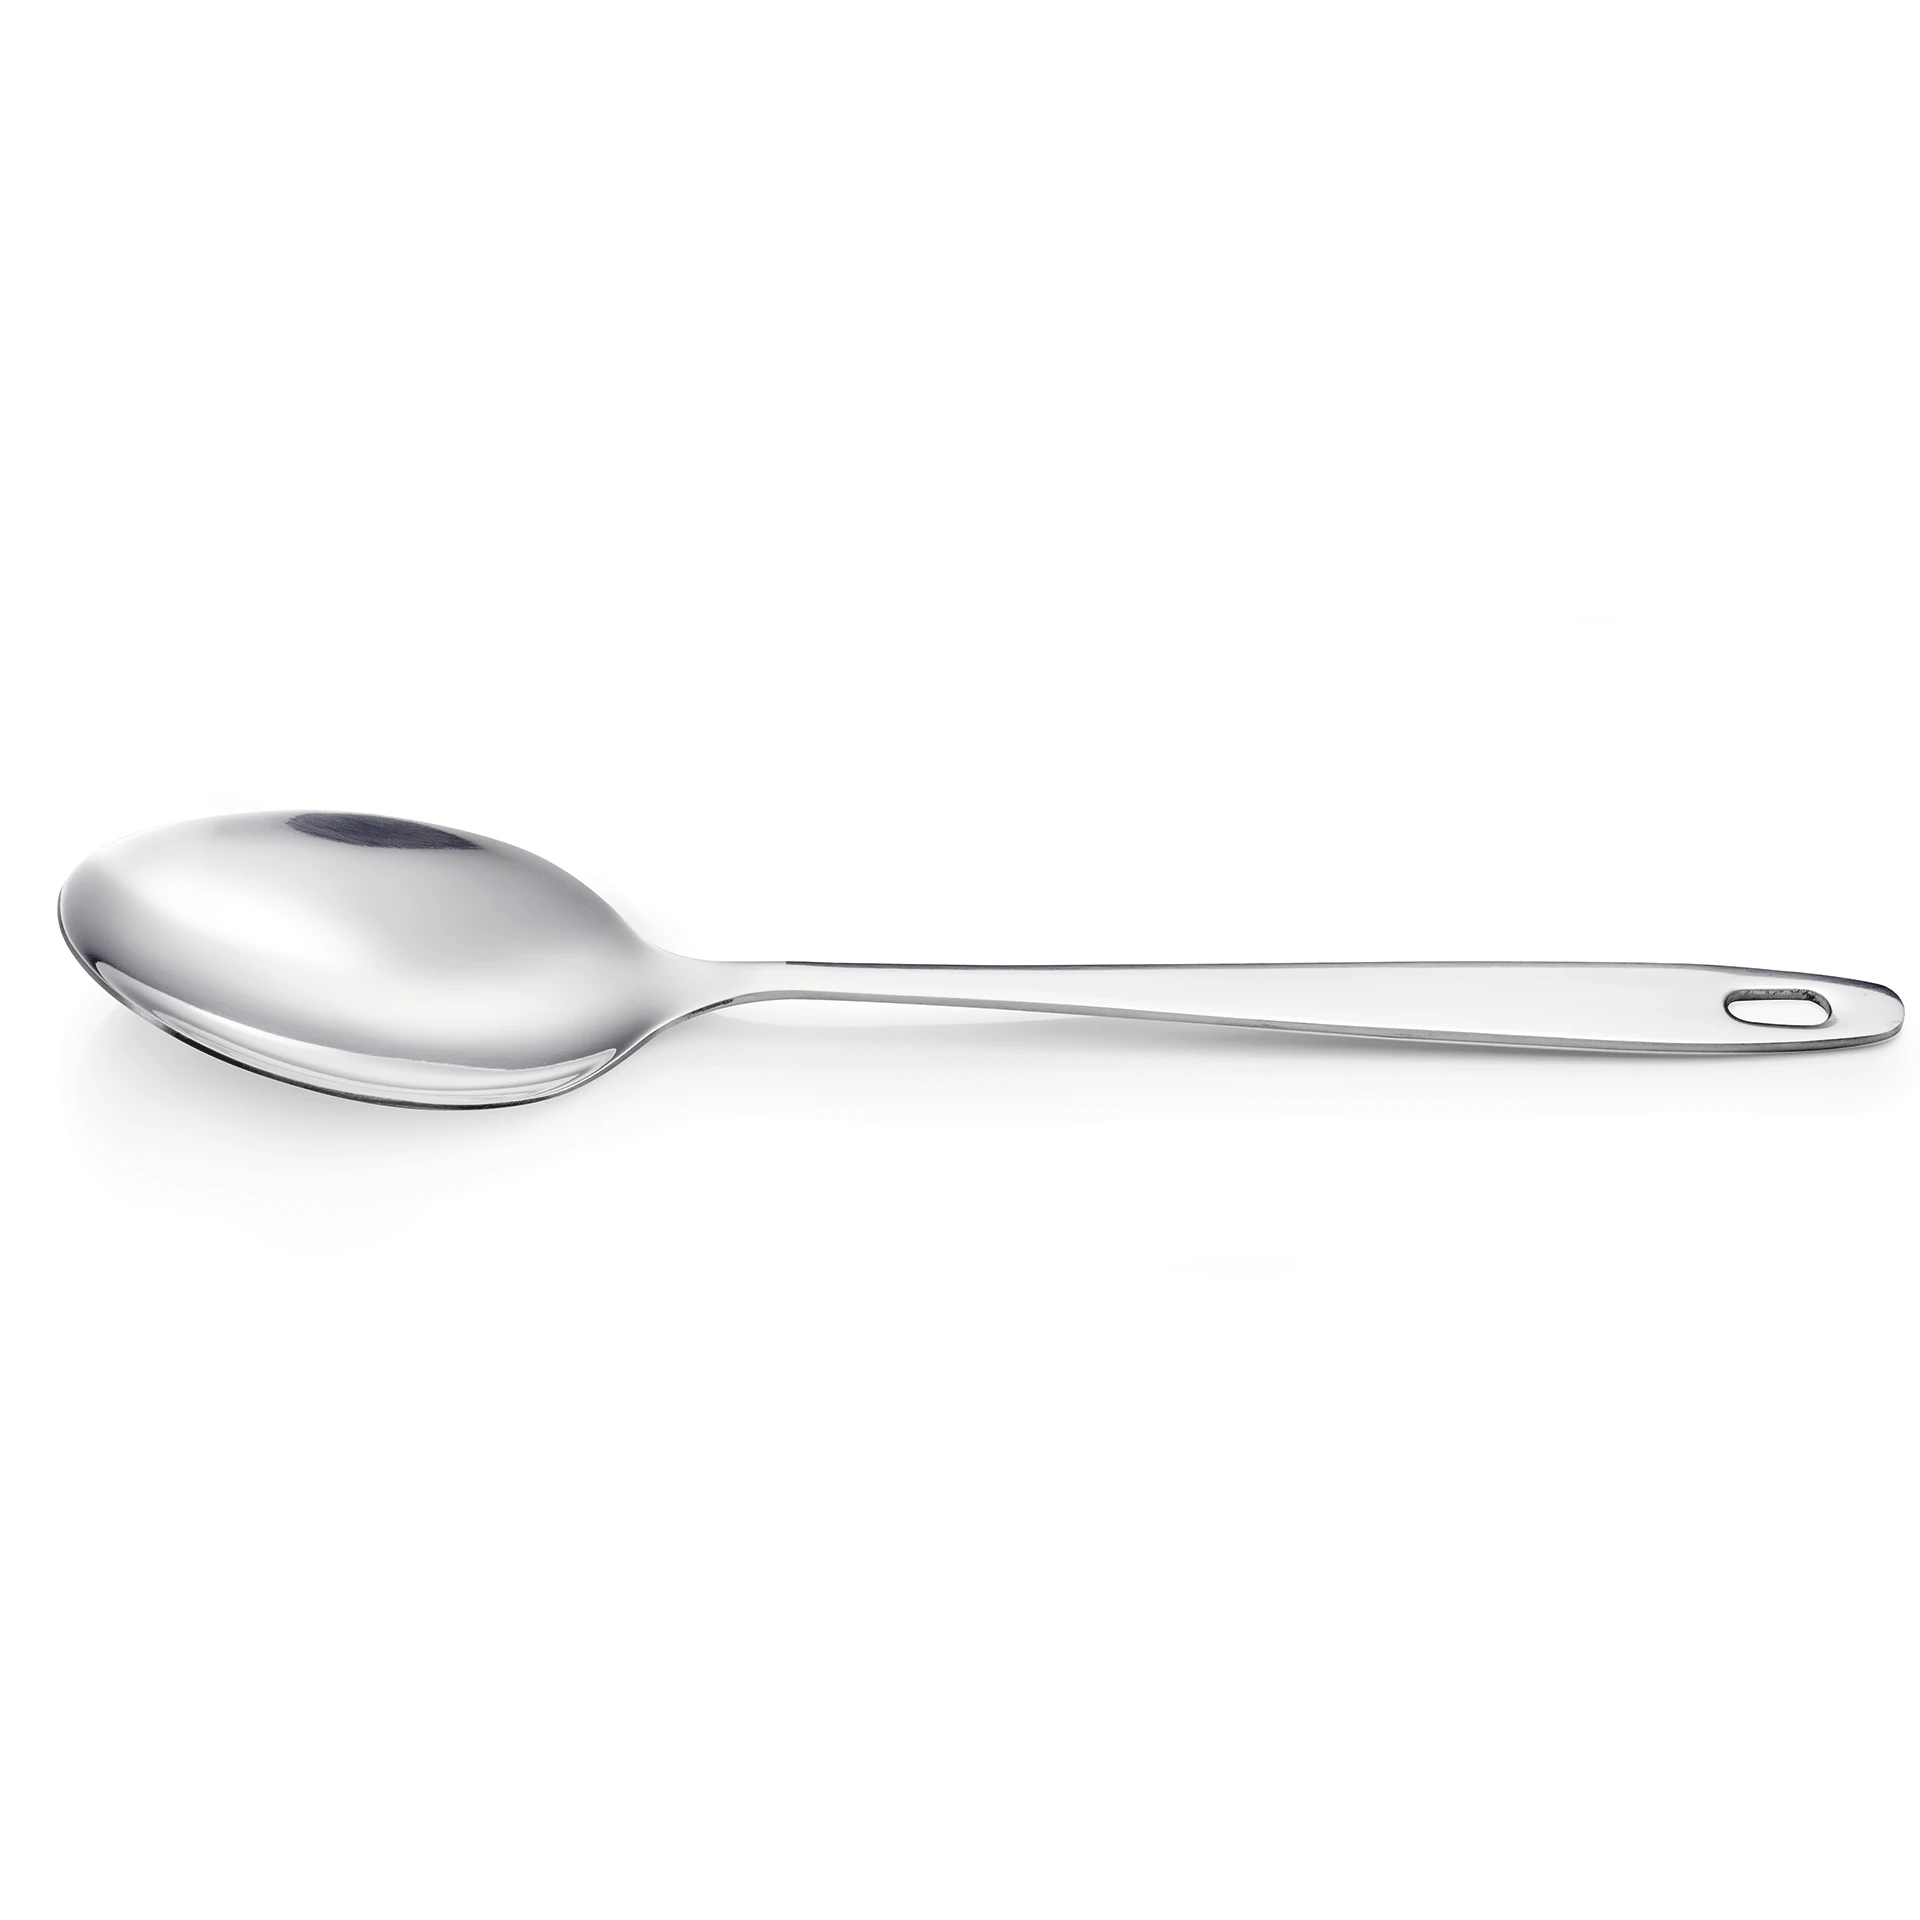 Serving spoon Kitchen Tool 1879